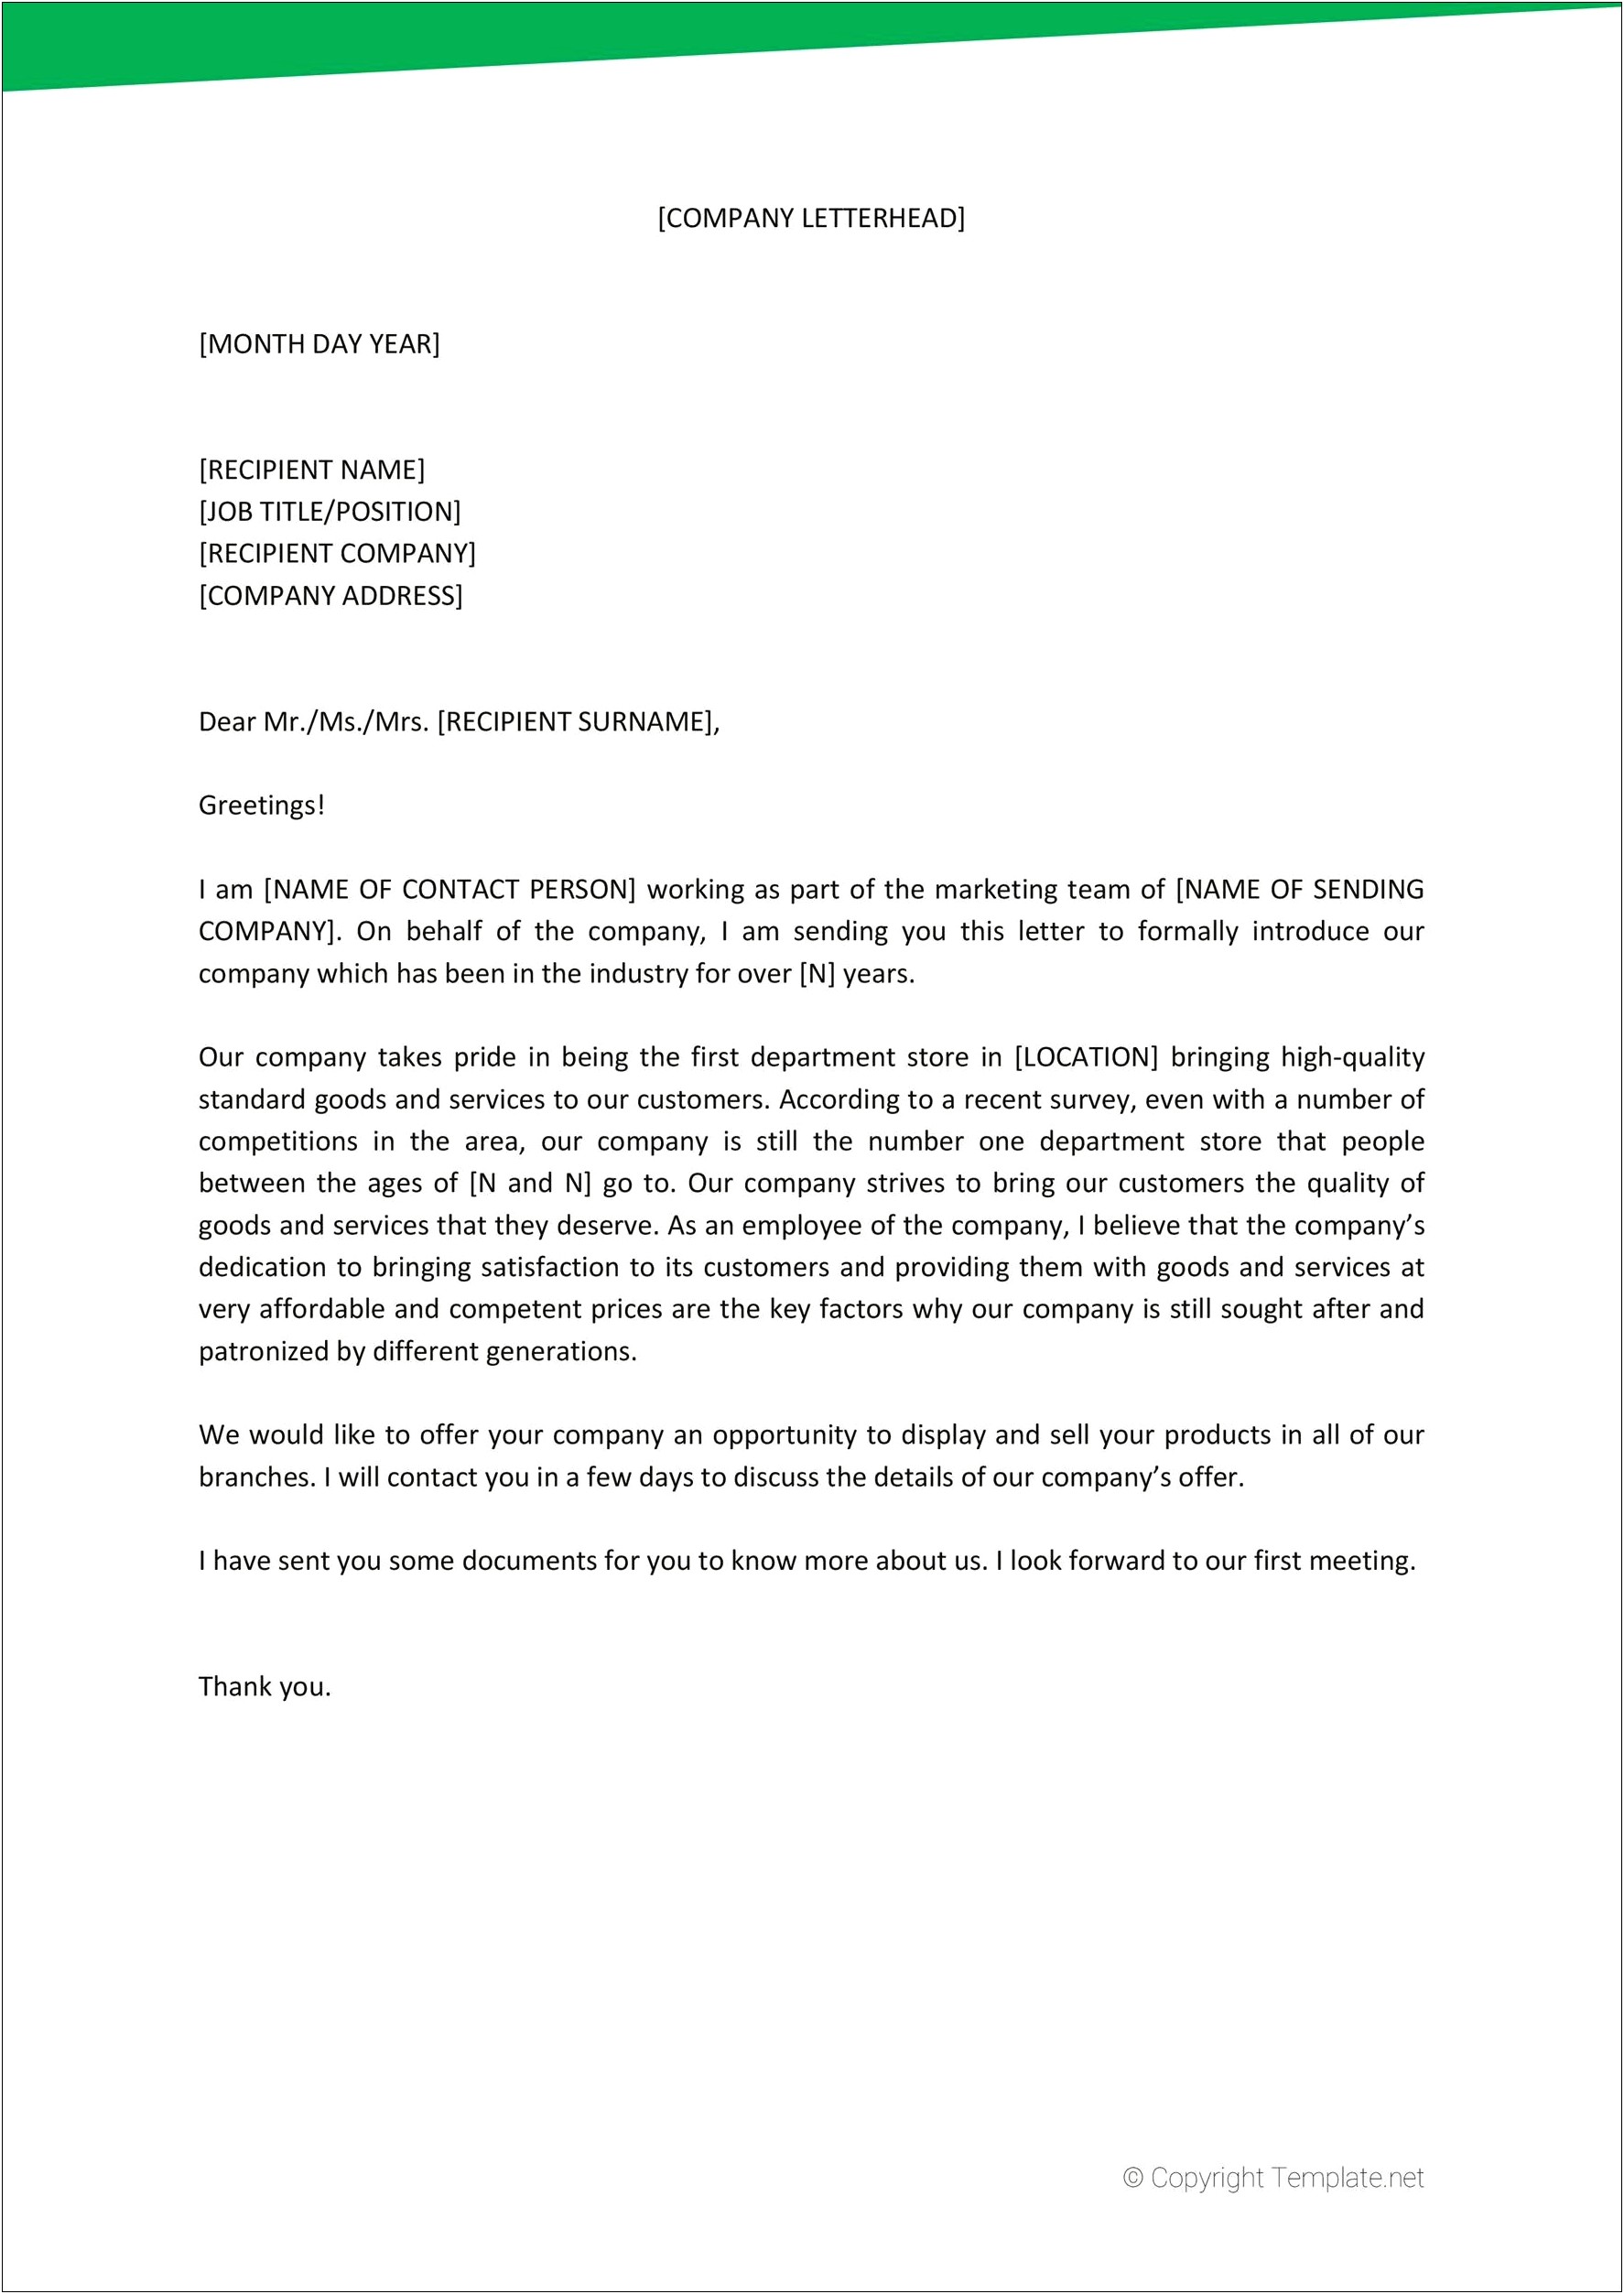 Free Business Letter Templates For Internet Marketers